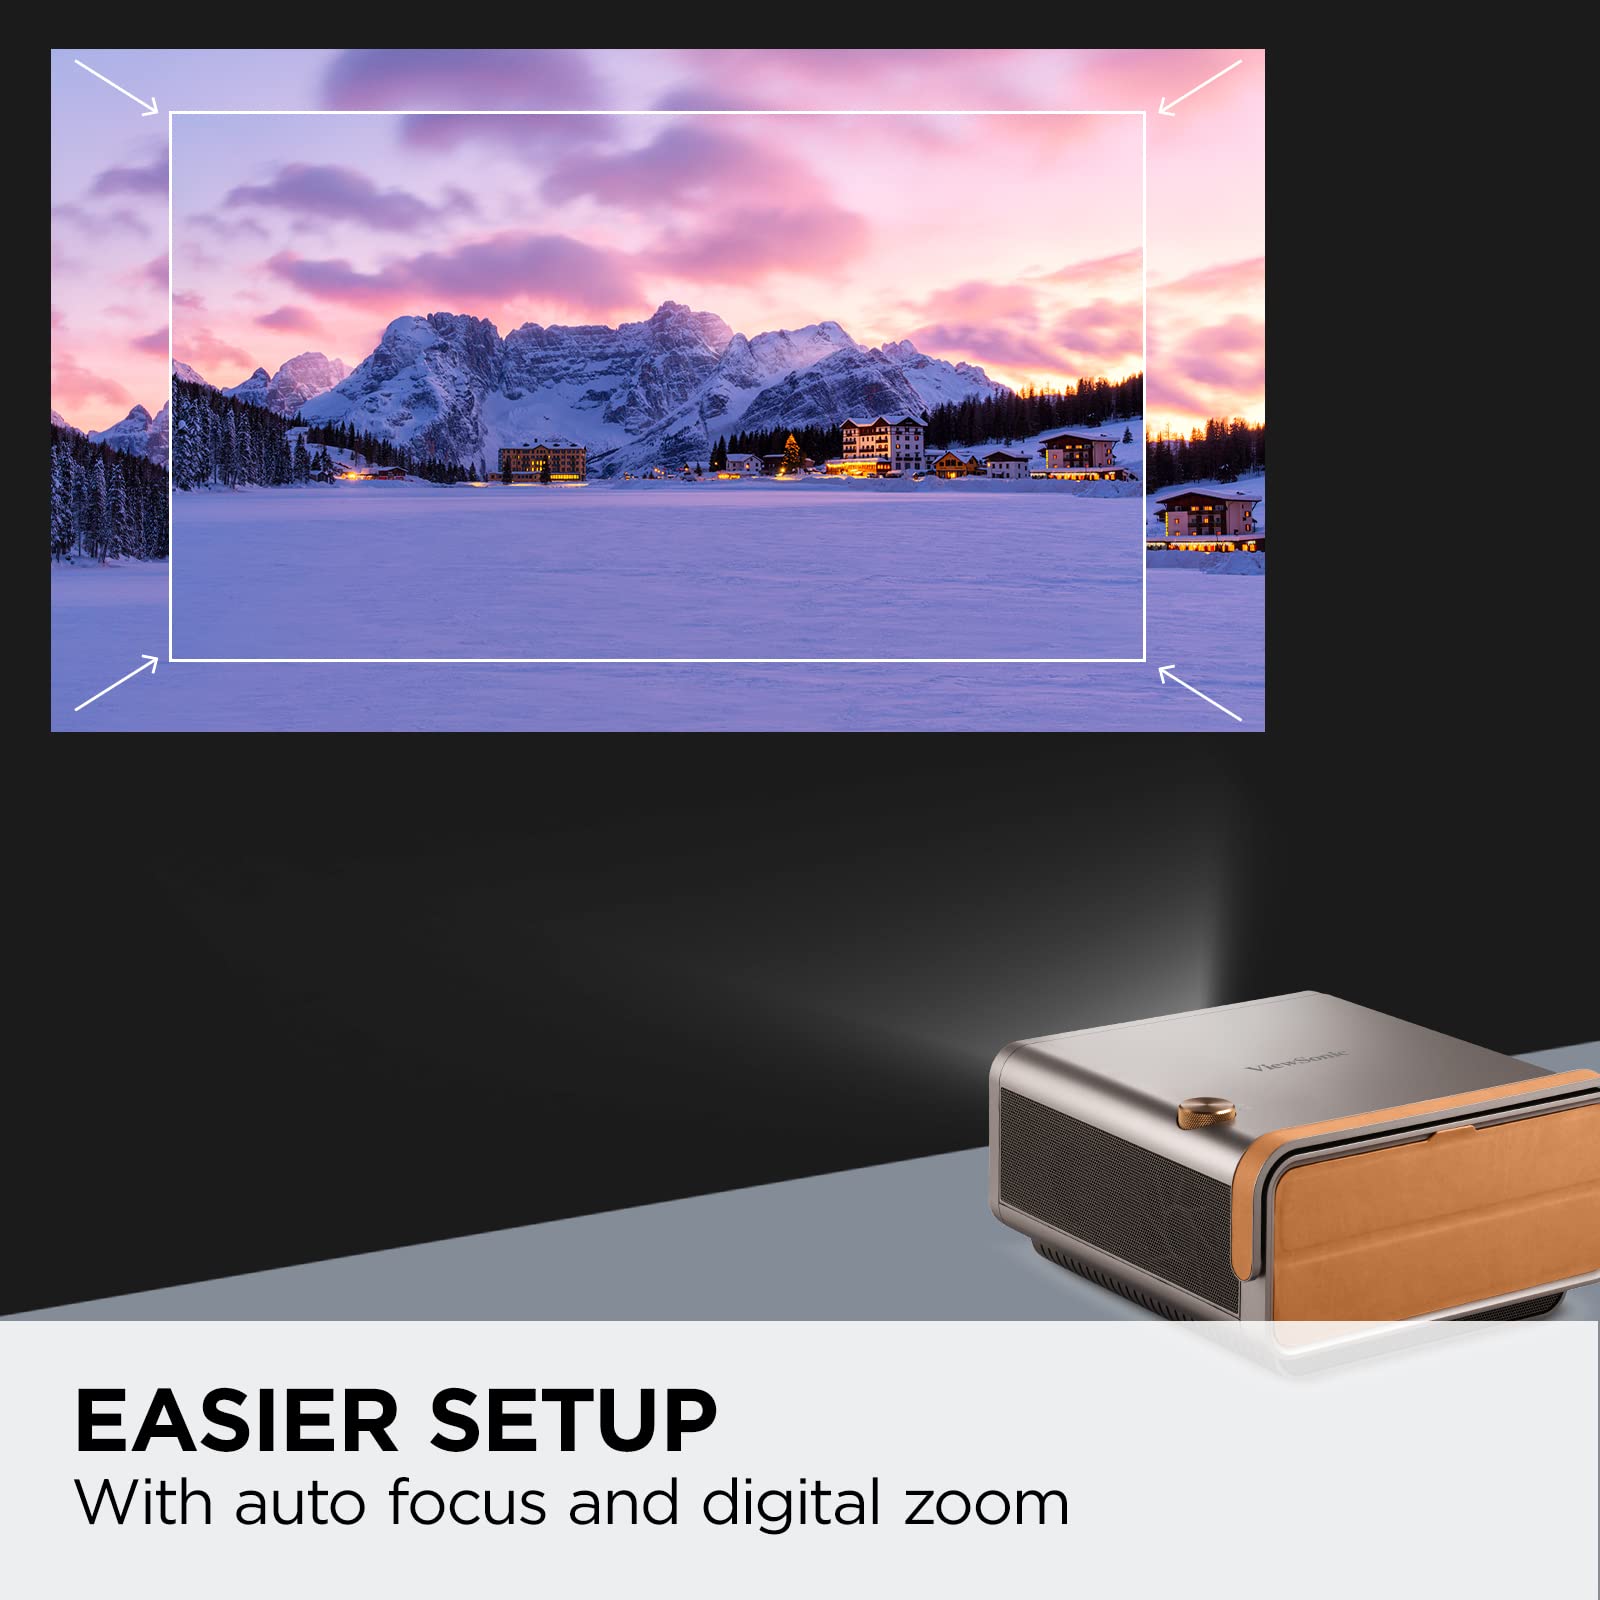 ViewSonic X11-4K True 4K UHD Short Throw LED Projector with H/V Keystone, Corner Adjustments, WiFi, USB C Connectivity, Cinematic Supercolor for Smart Home Theater